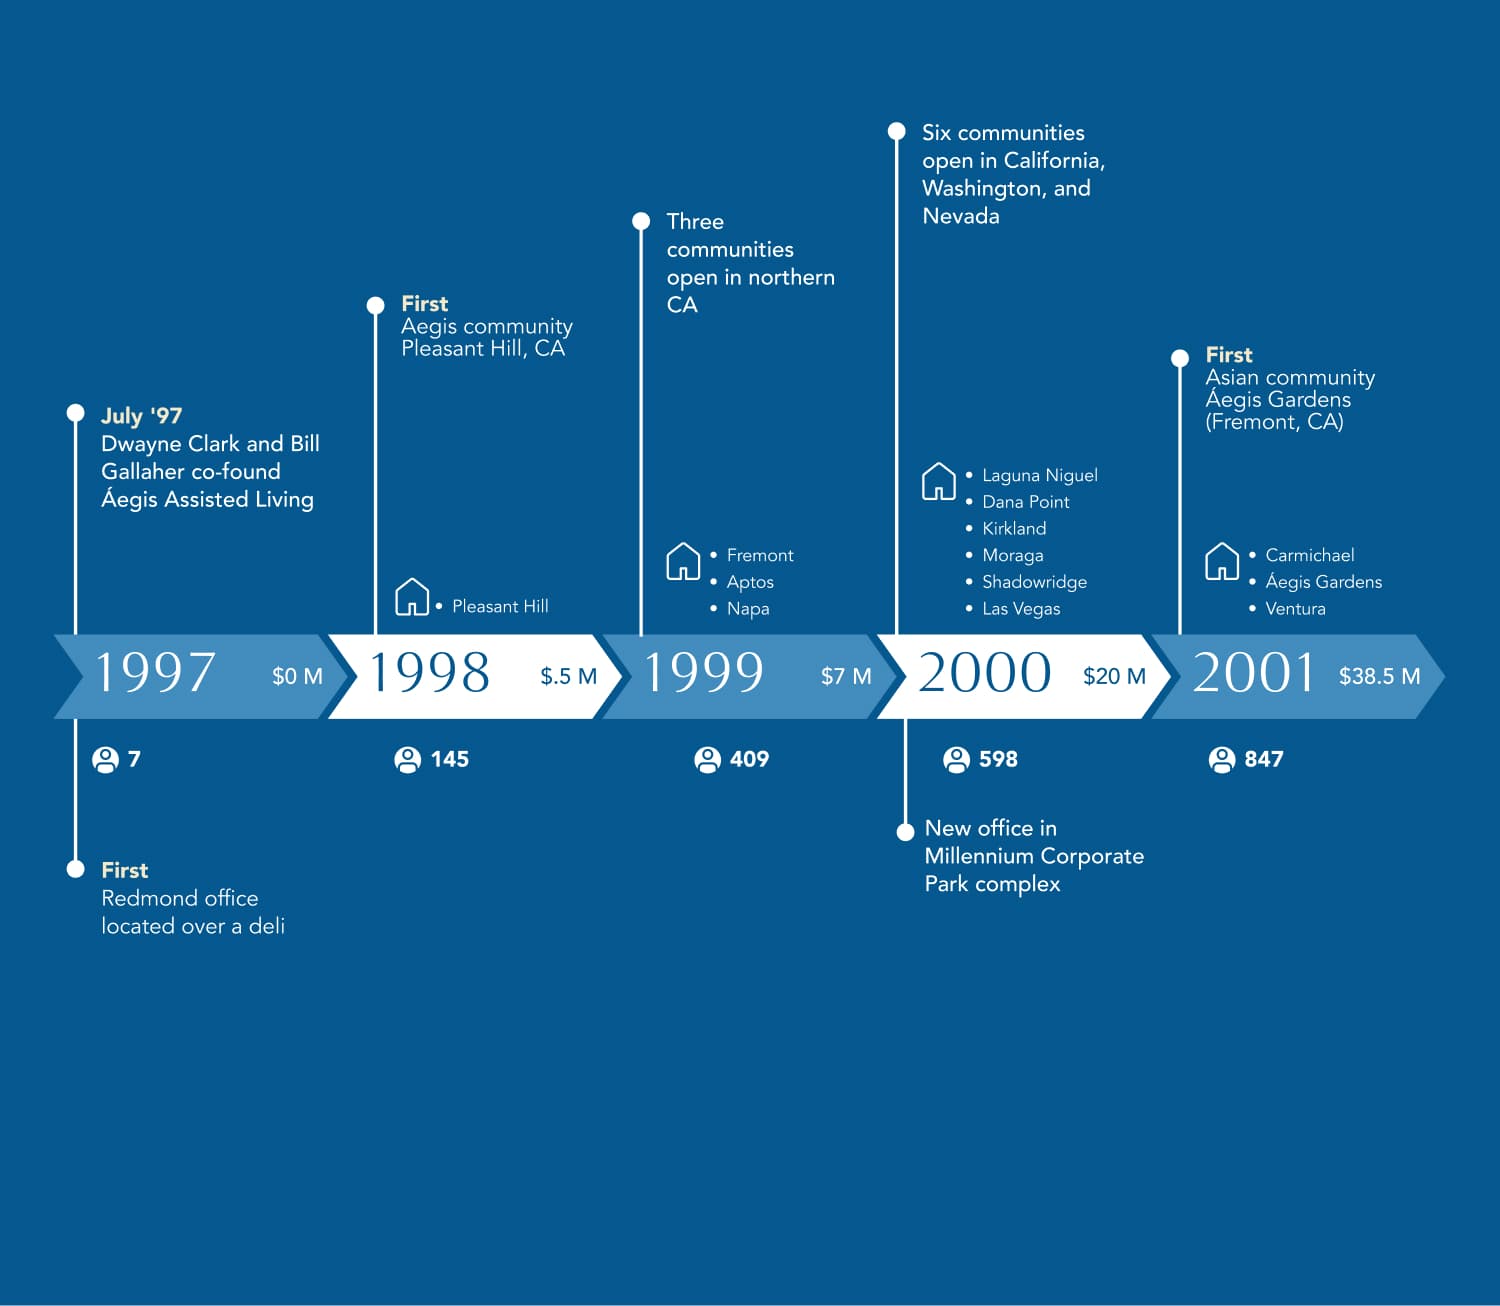 A timeline of Aegis Living’s history from 1997 to 2001